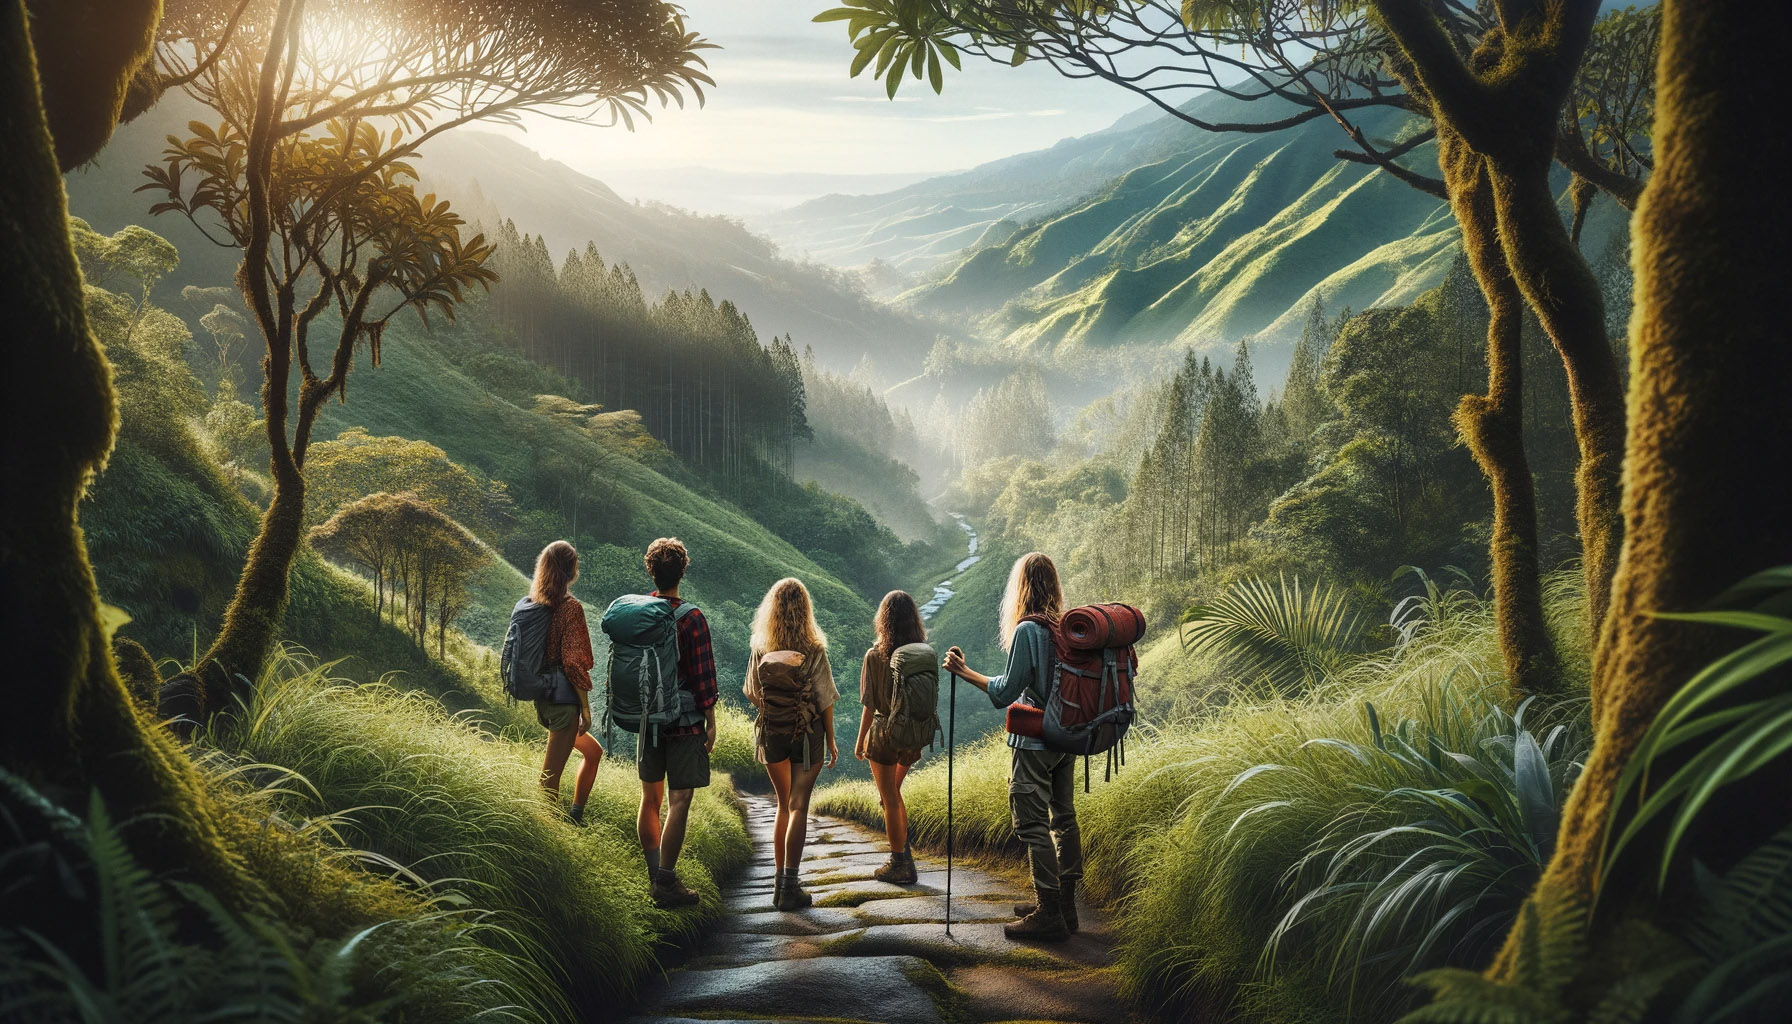 An image showing a group of hikers, including females and a male, on a scenic nature trail. The landscape is lush and verdant, with a clear path